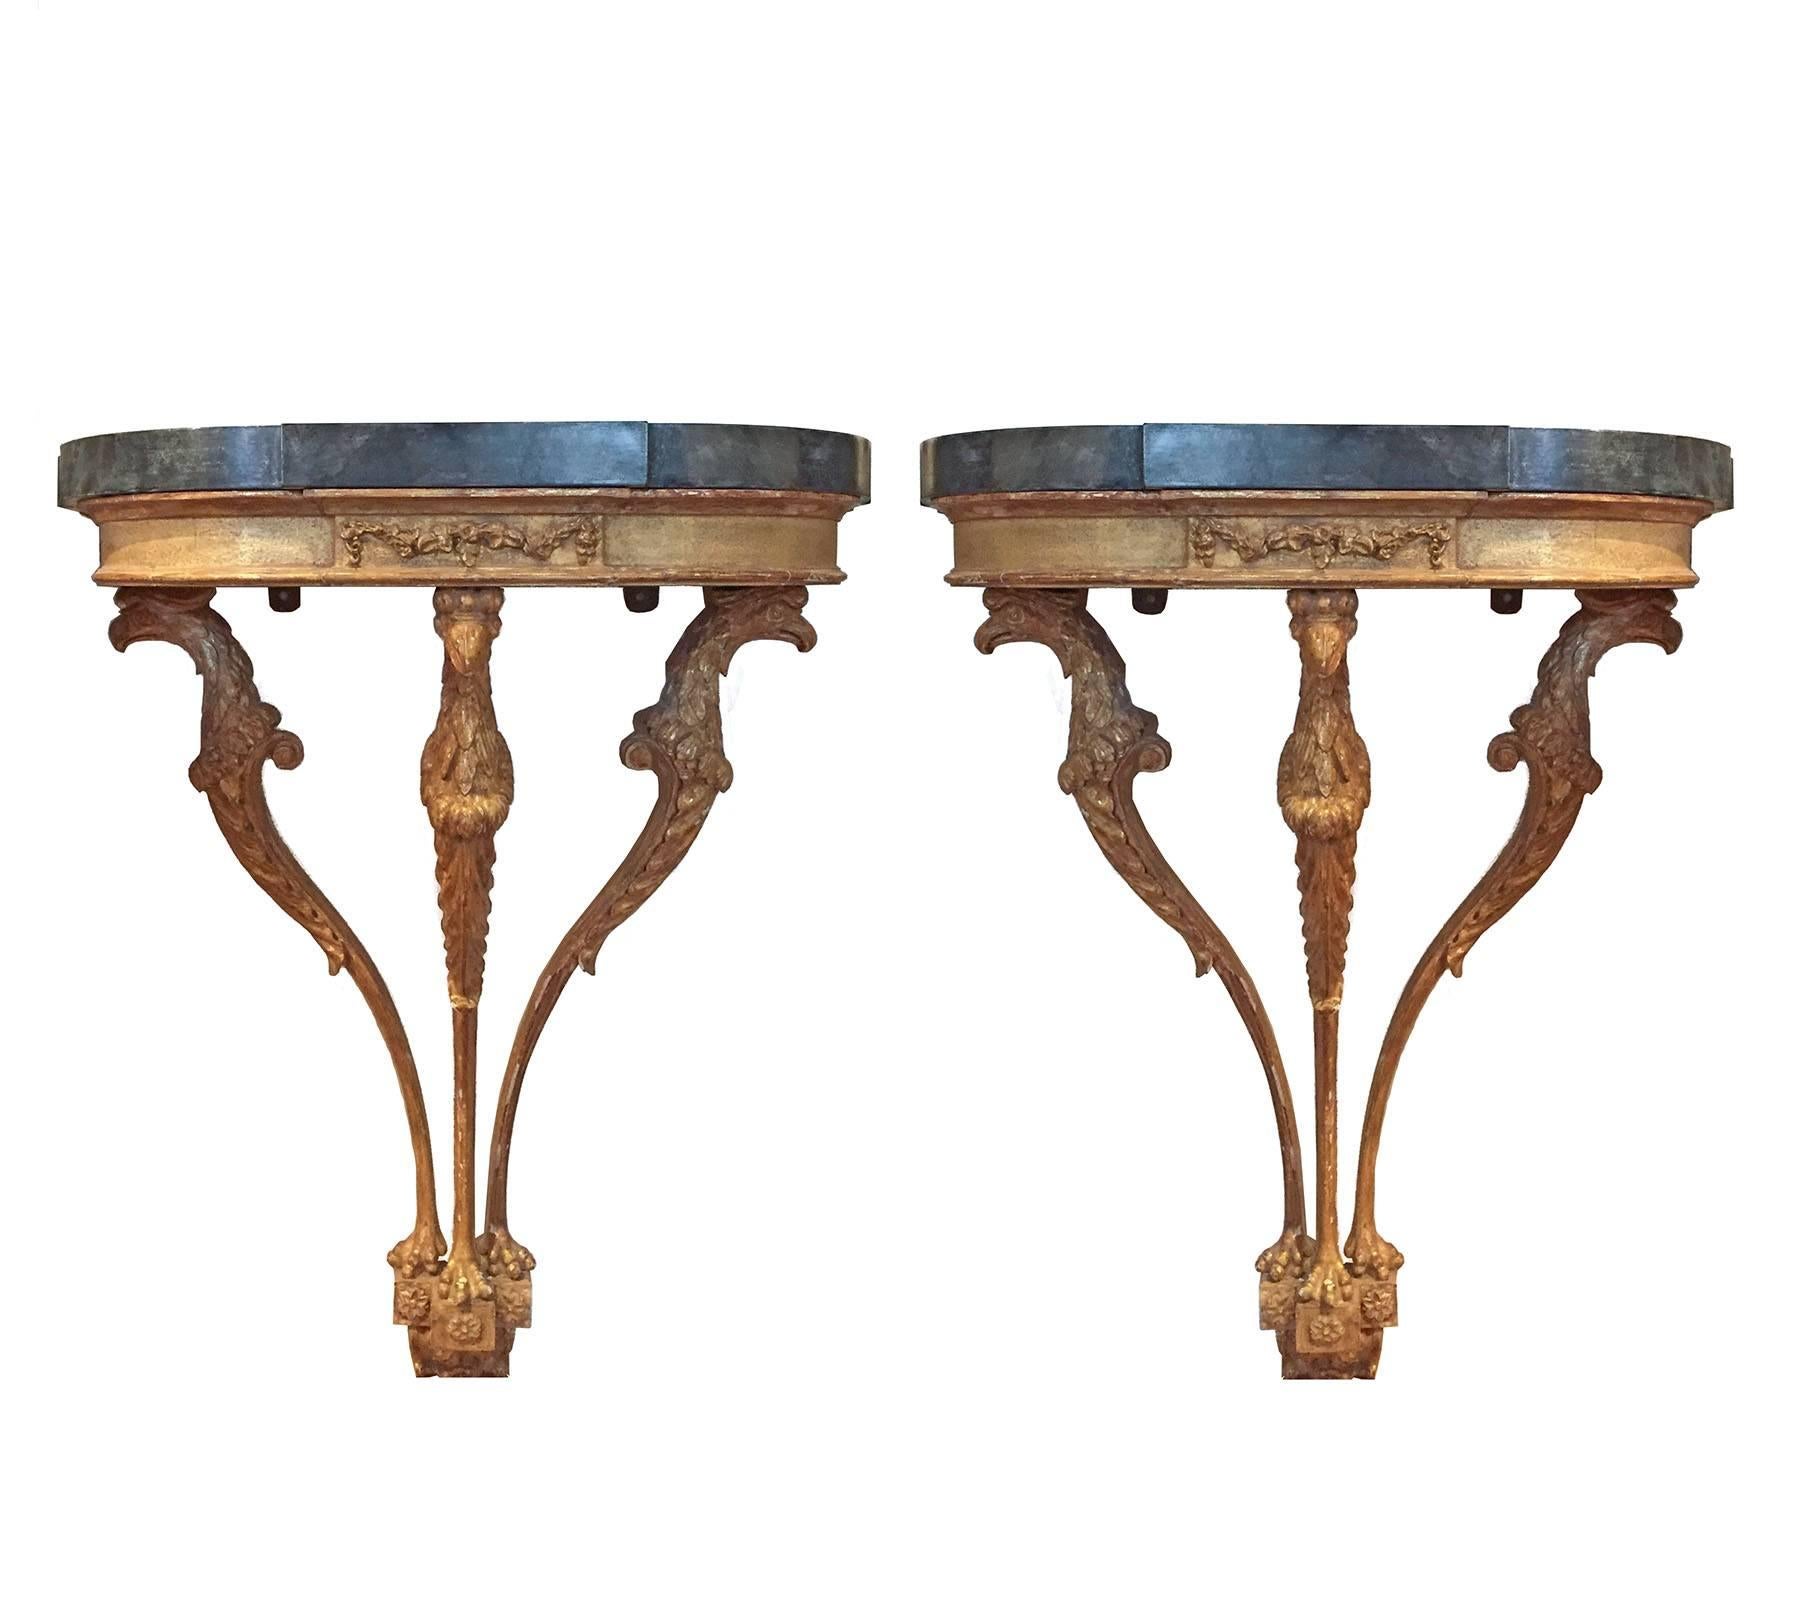 Pair of Adam inlaid satinwood and carved giltwood hanging consoles.